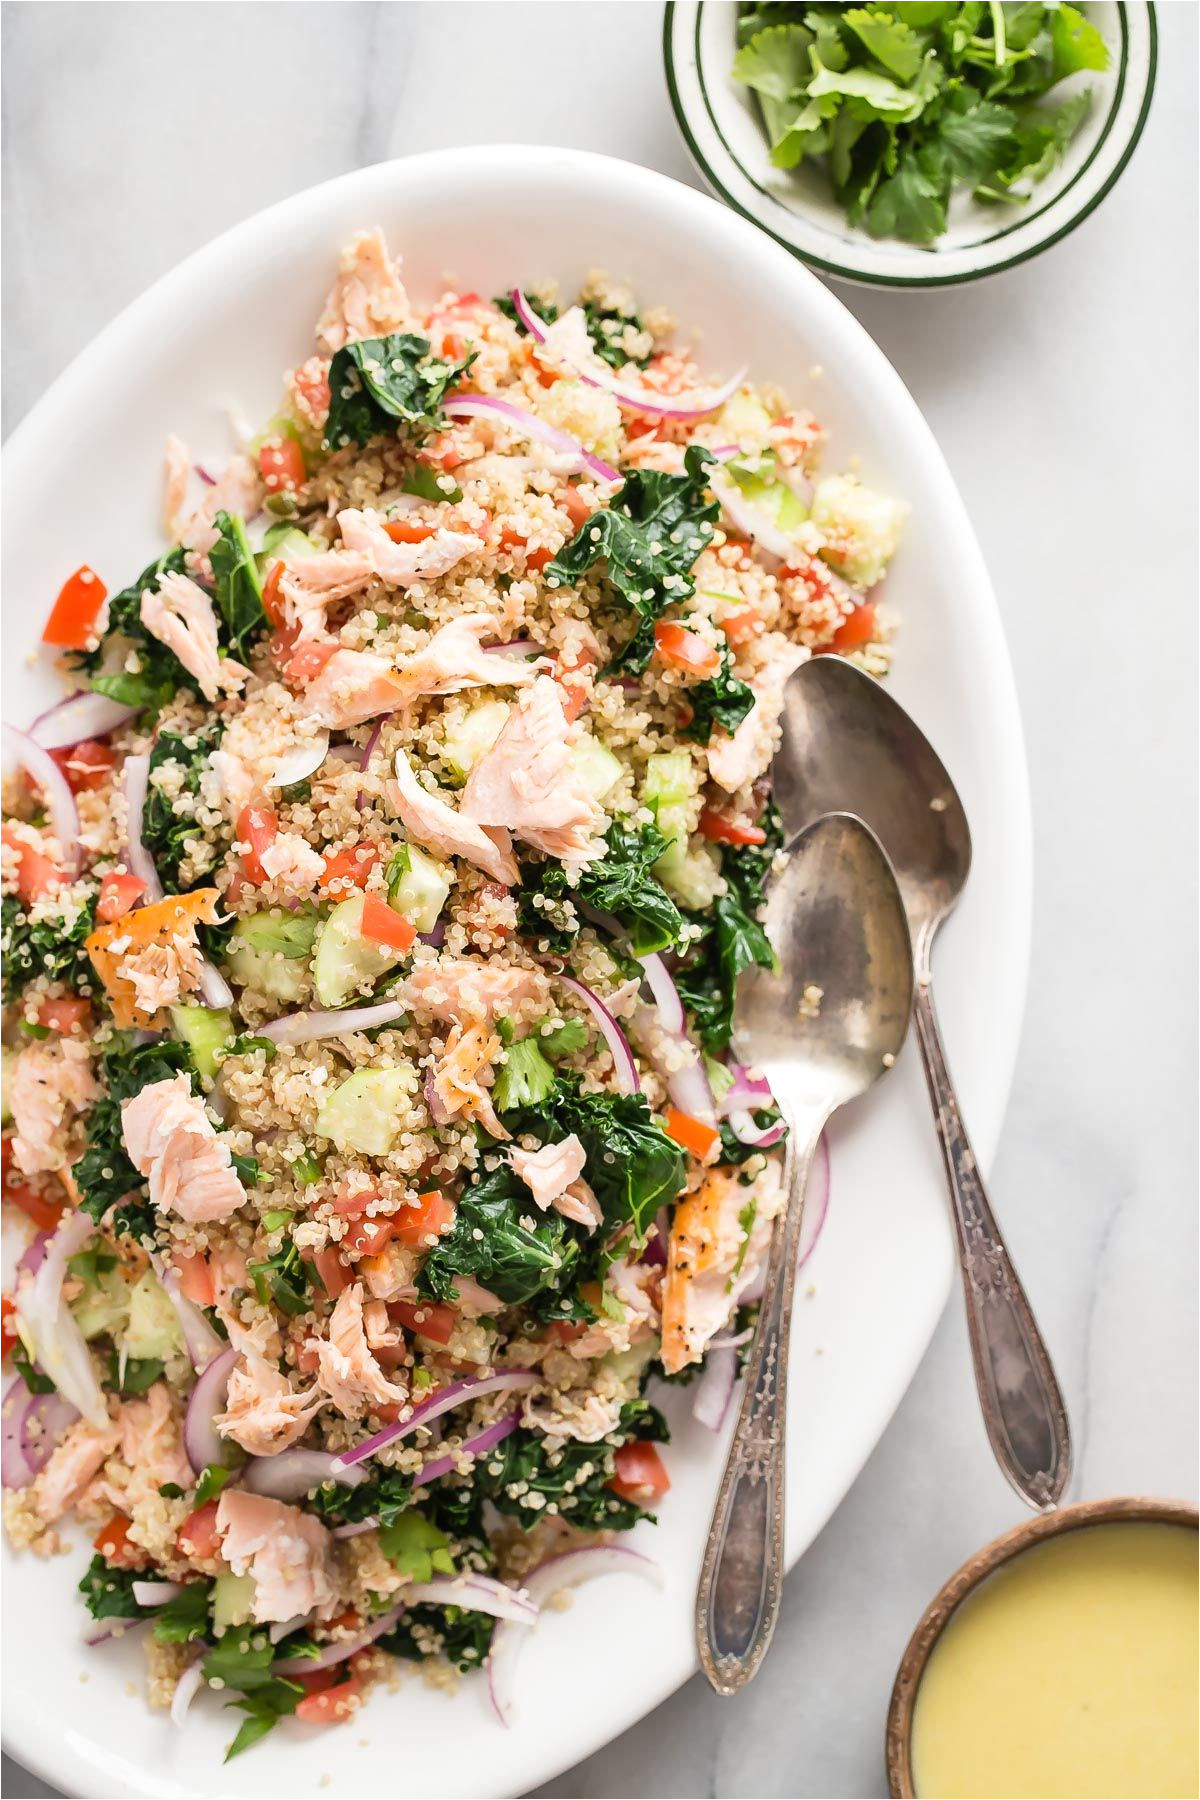 roasted salmon flakes with quinoa and fresh steamed kale this healthy kale salad is dressed in a tangy garlic and lemon sauce